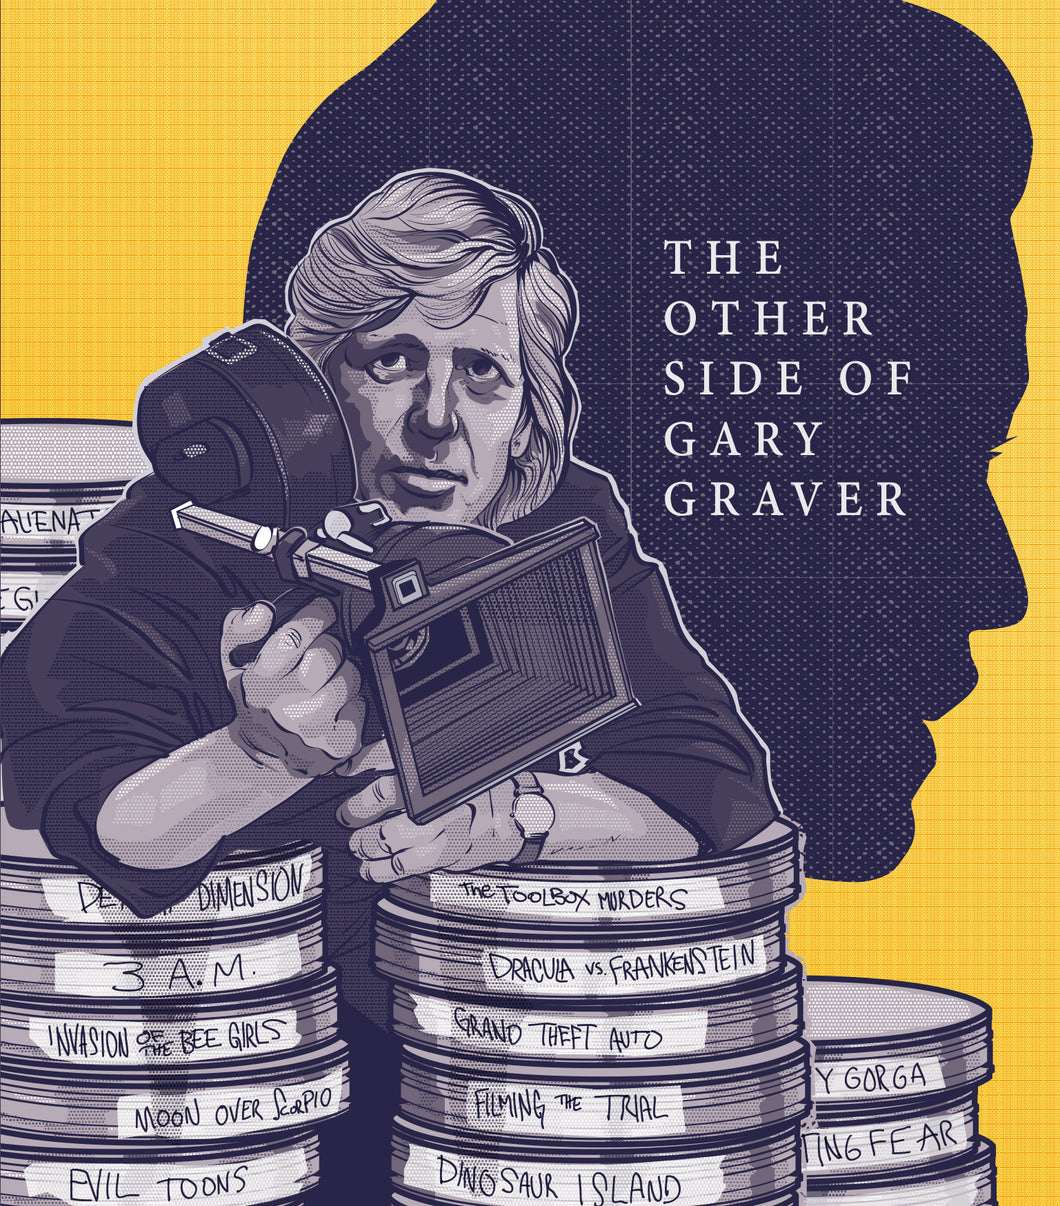 Blu-ray: The Other Side of Gary Graver